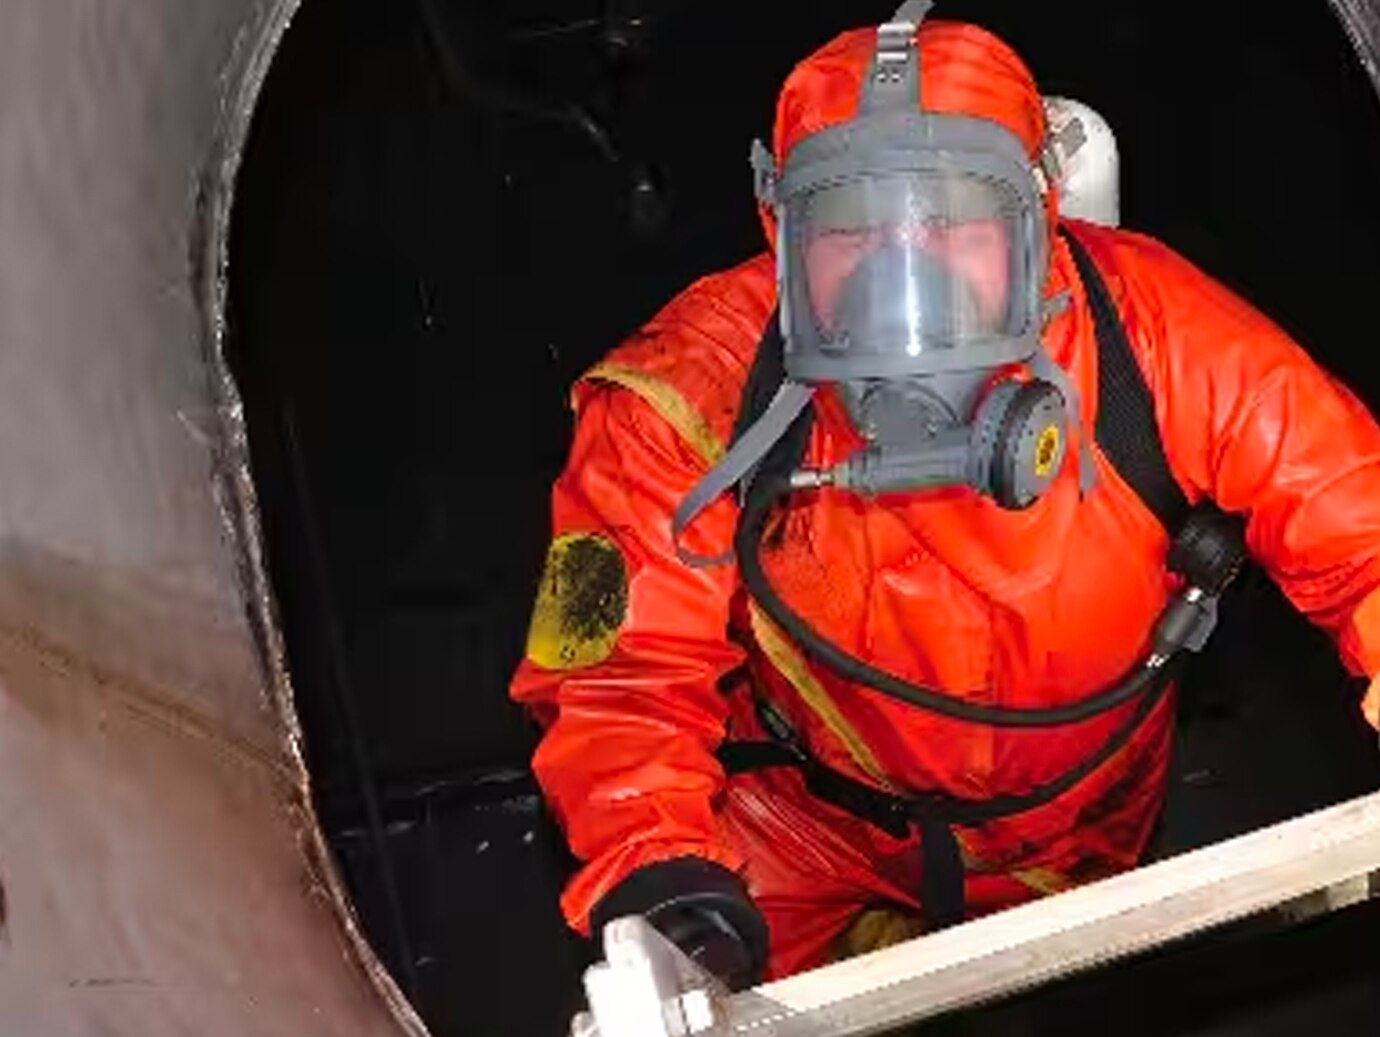 Firefighter in safety gear climbing out of a confined space